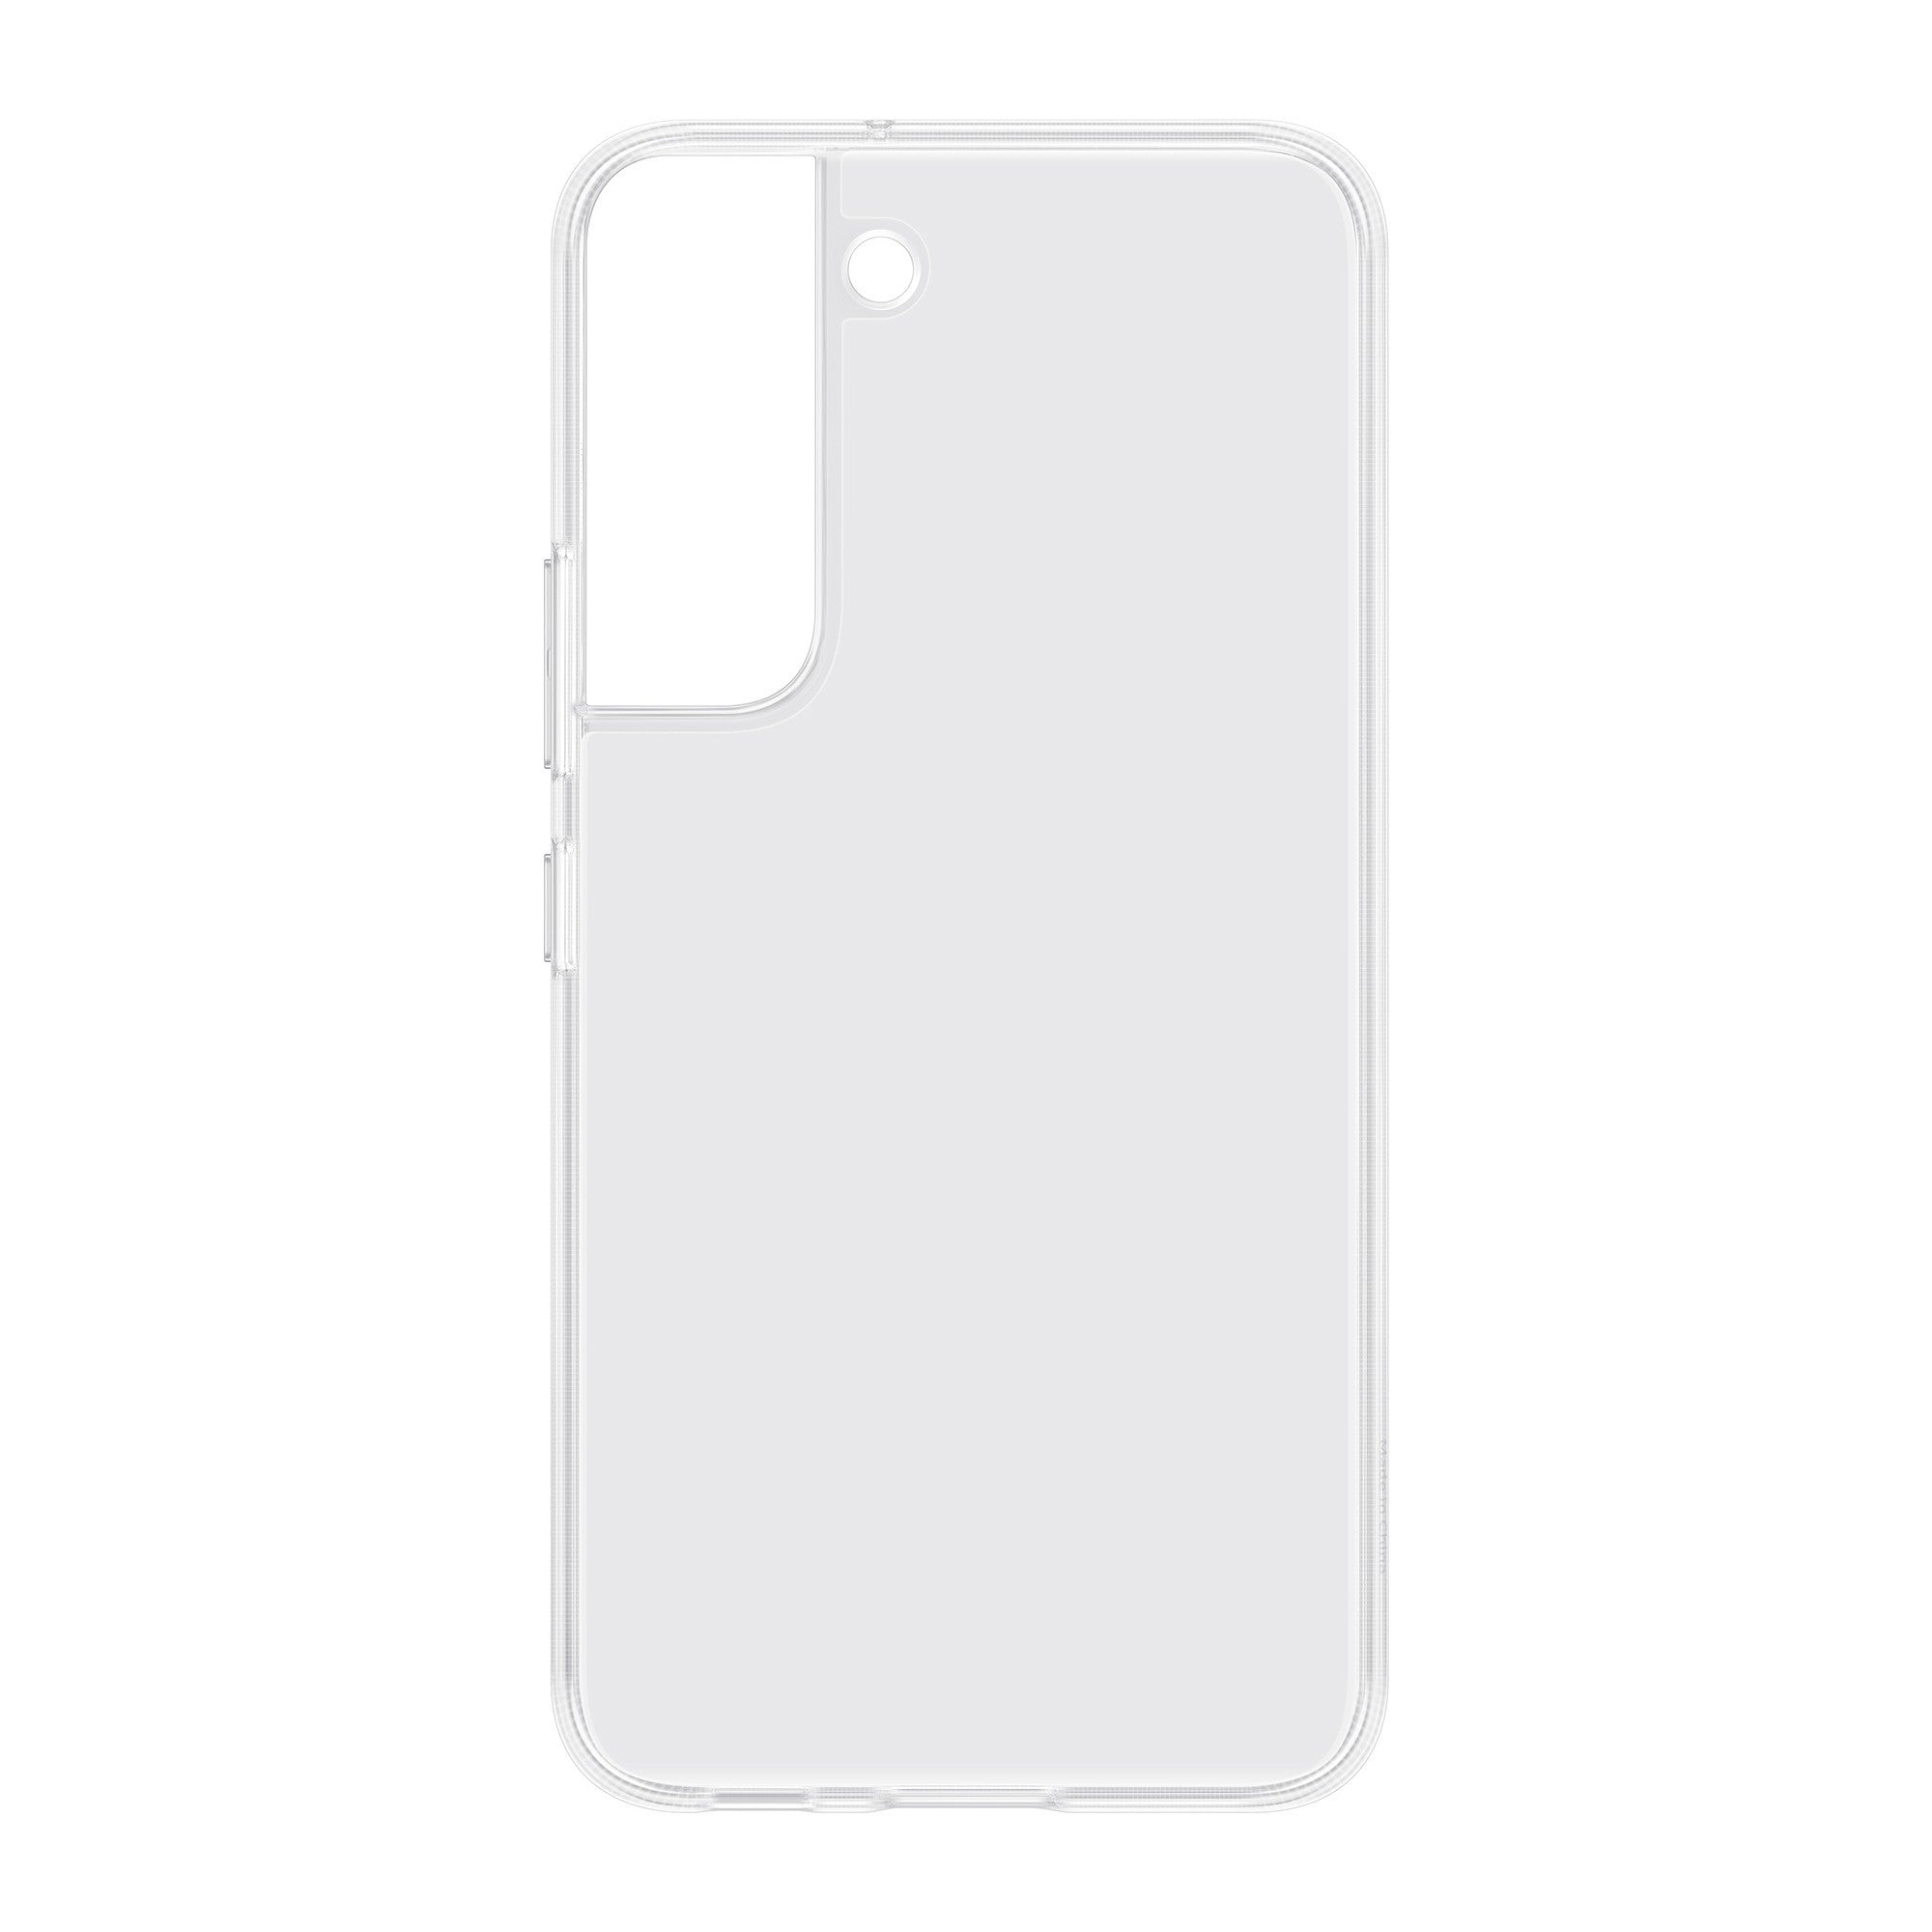 Samsung Galaxy S22 5G OEM Clear Cover Case - Clear - 15-09848